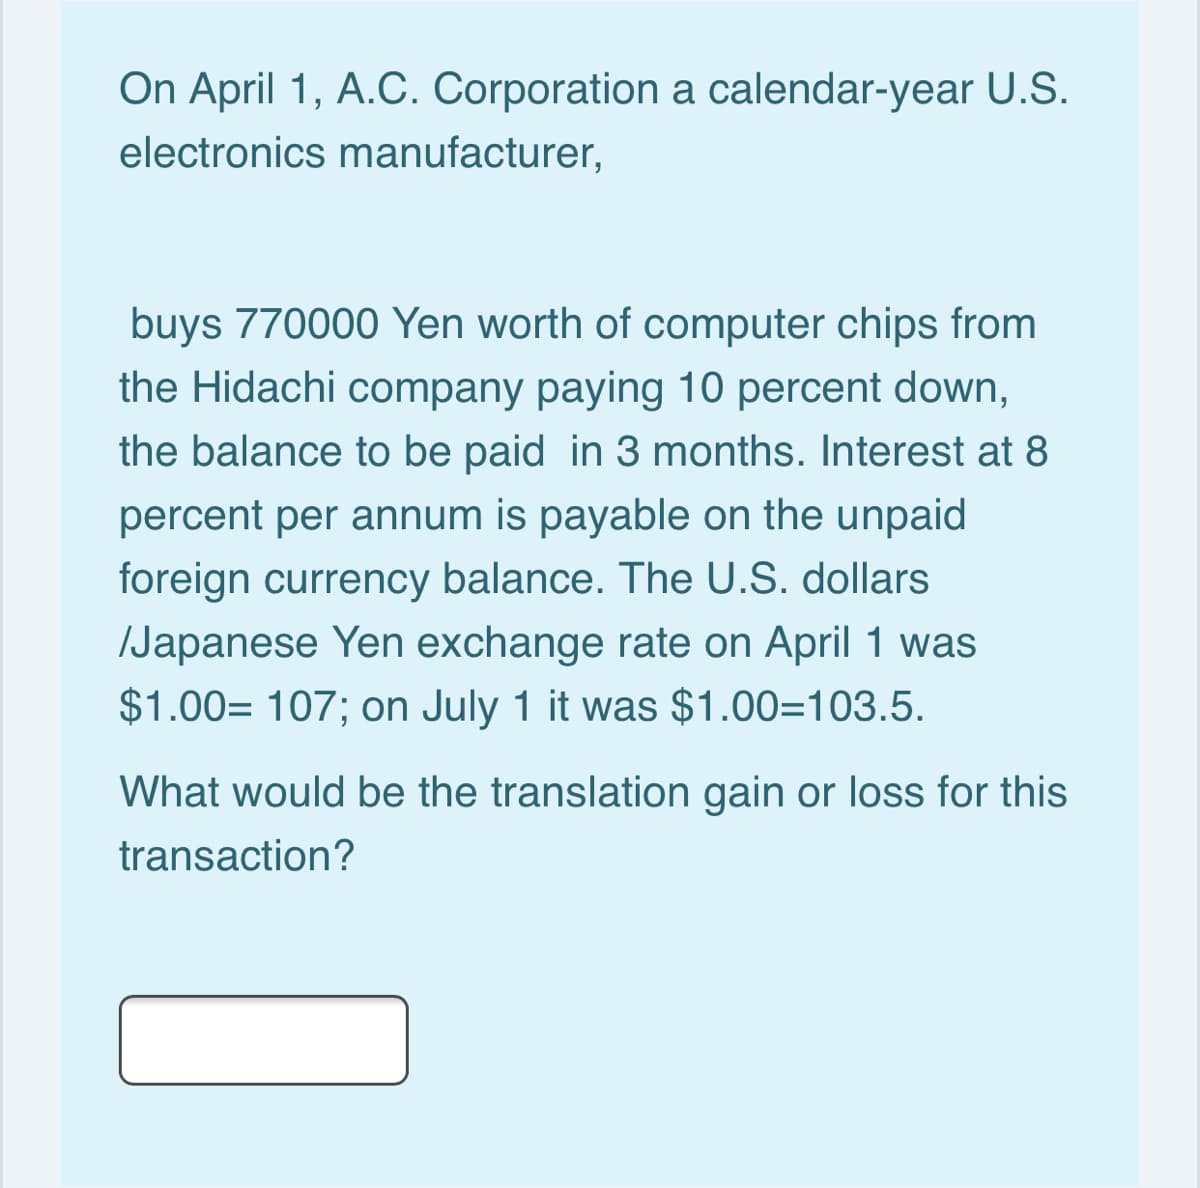 On April 1, A.C. Corporation a calendar-year U.S.
electronics manufacturer,
buys 770000 Yen worth of computer chips from
the Hidachi company paying 10 percent down,
the balance to be paid in 3 months. Interest at 8
percent per annum is payable on the unpaid
foreign currency balance. The U.S. dollars
/Japanese Yen exchange rate on April 1 was
$1.00= 107; on July 1 it was $1.00=103.5.
What would be the translation gain or loss for this
transaction?
